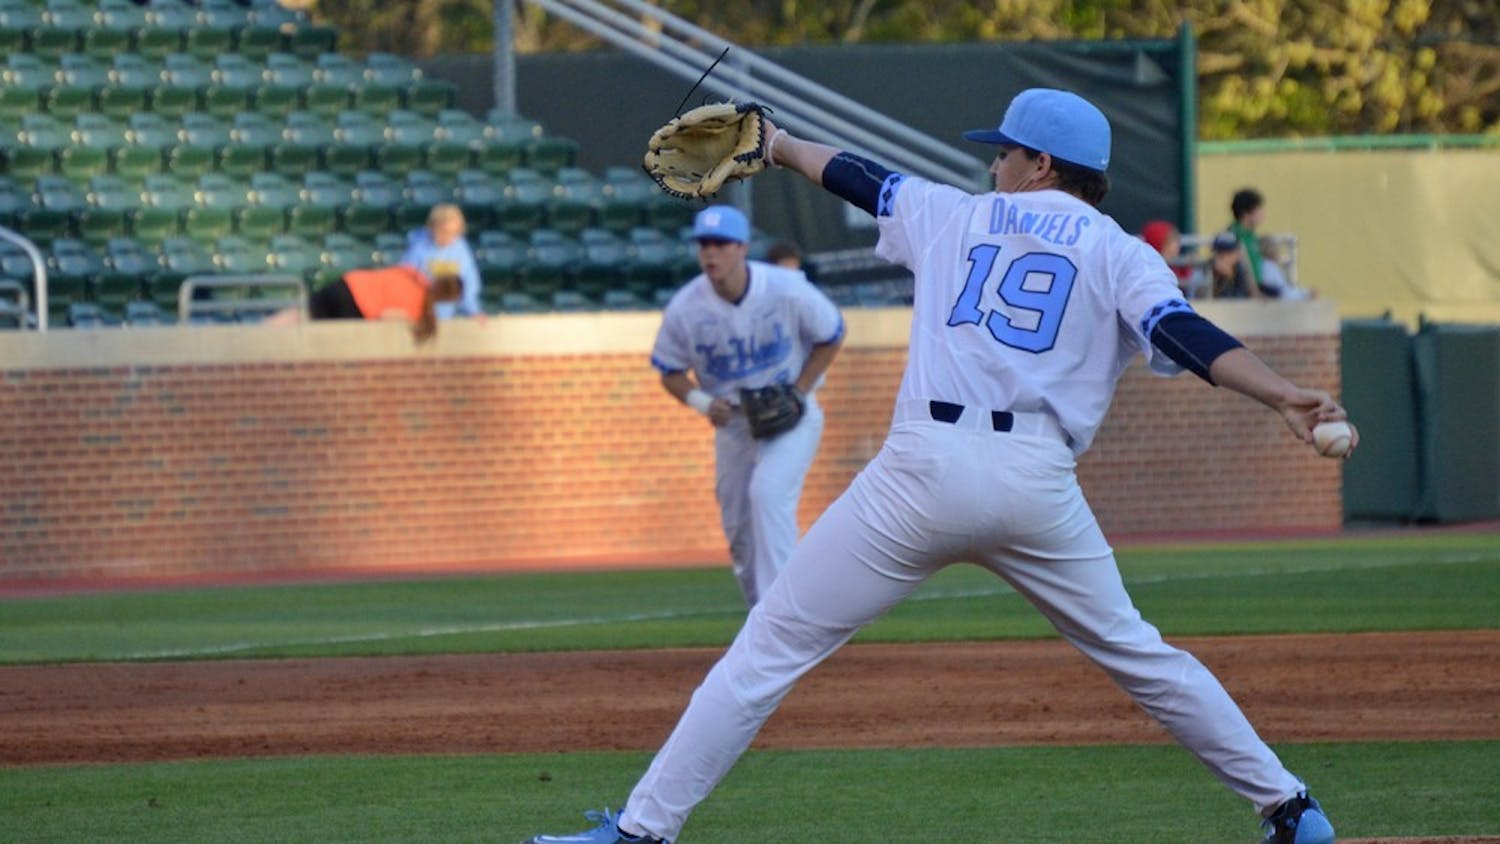 Sophomore Brett Daniels (19) pitches the ball during the game against Davidson College on Tuesday. The Tar Heels won 10-2.